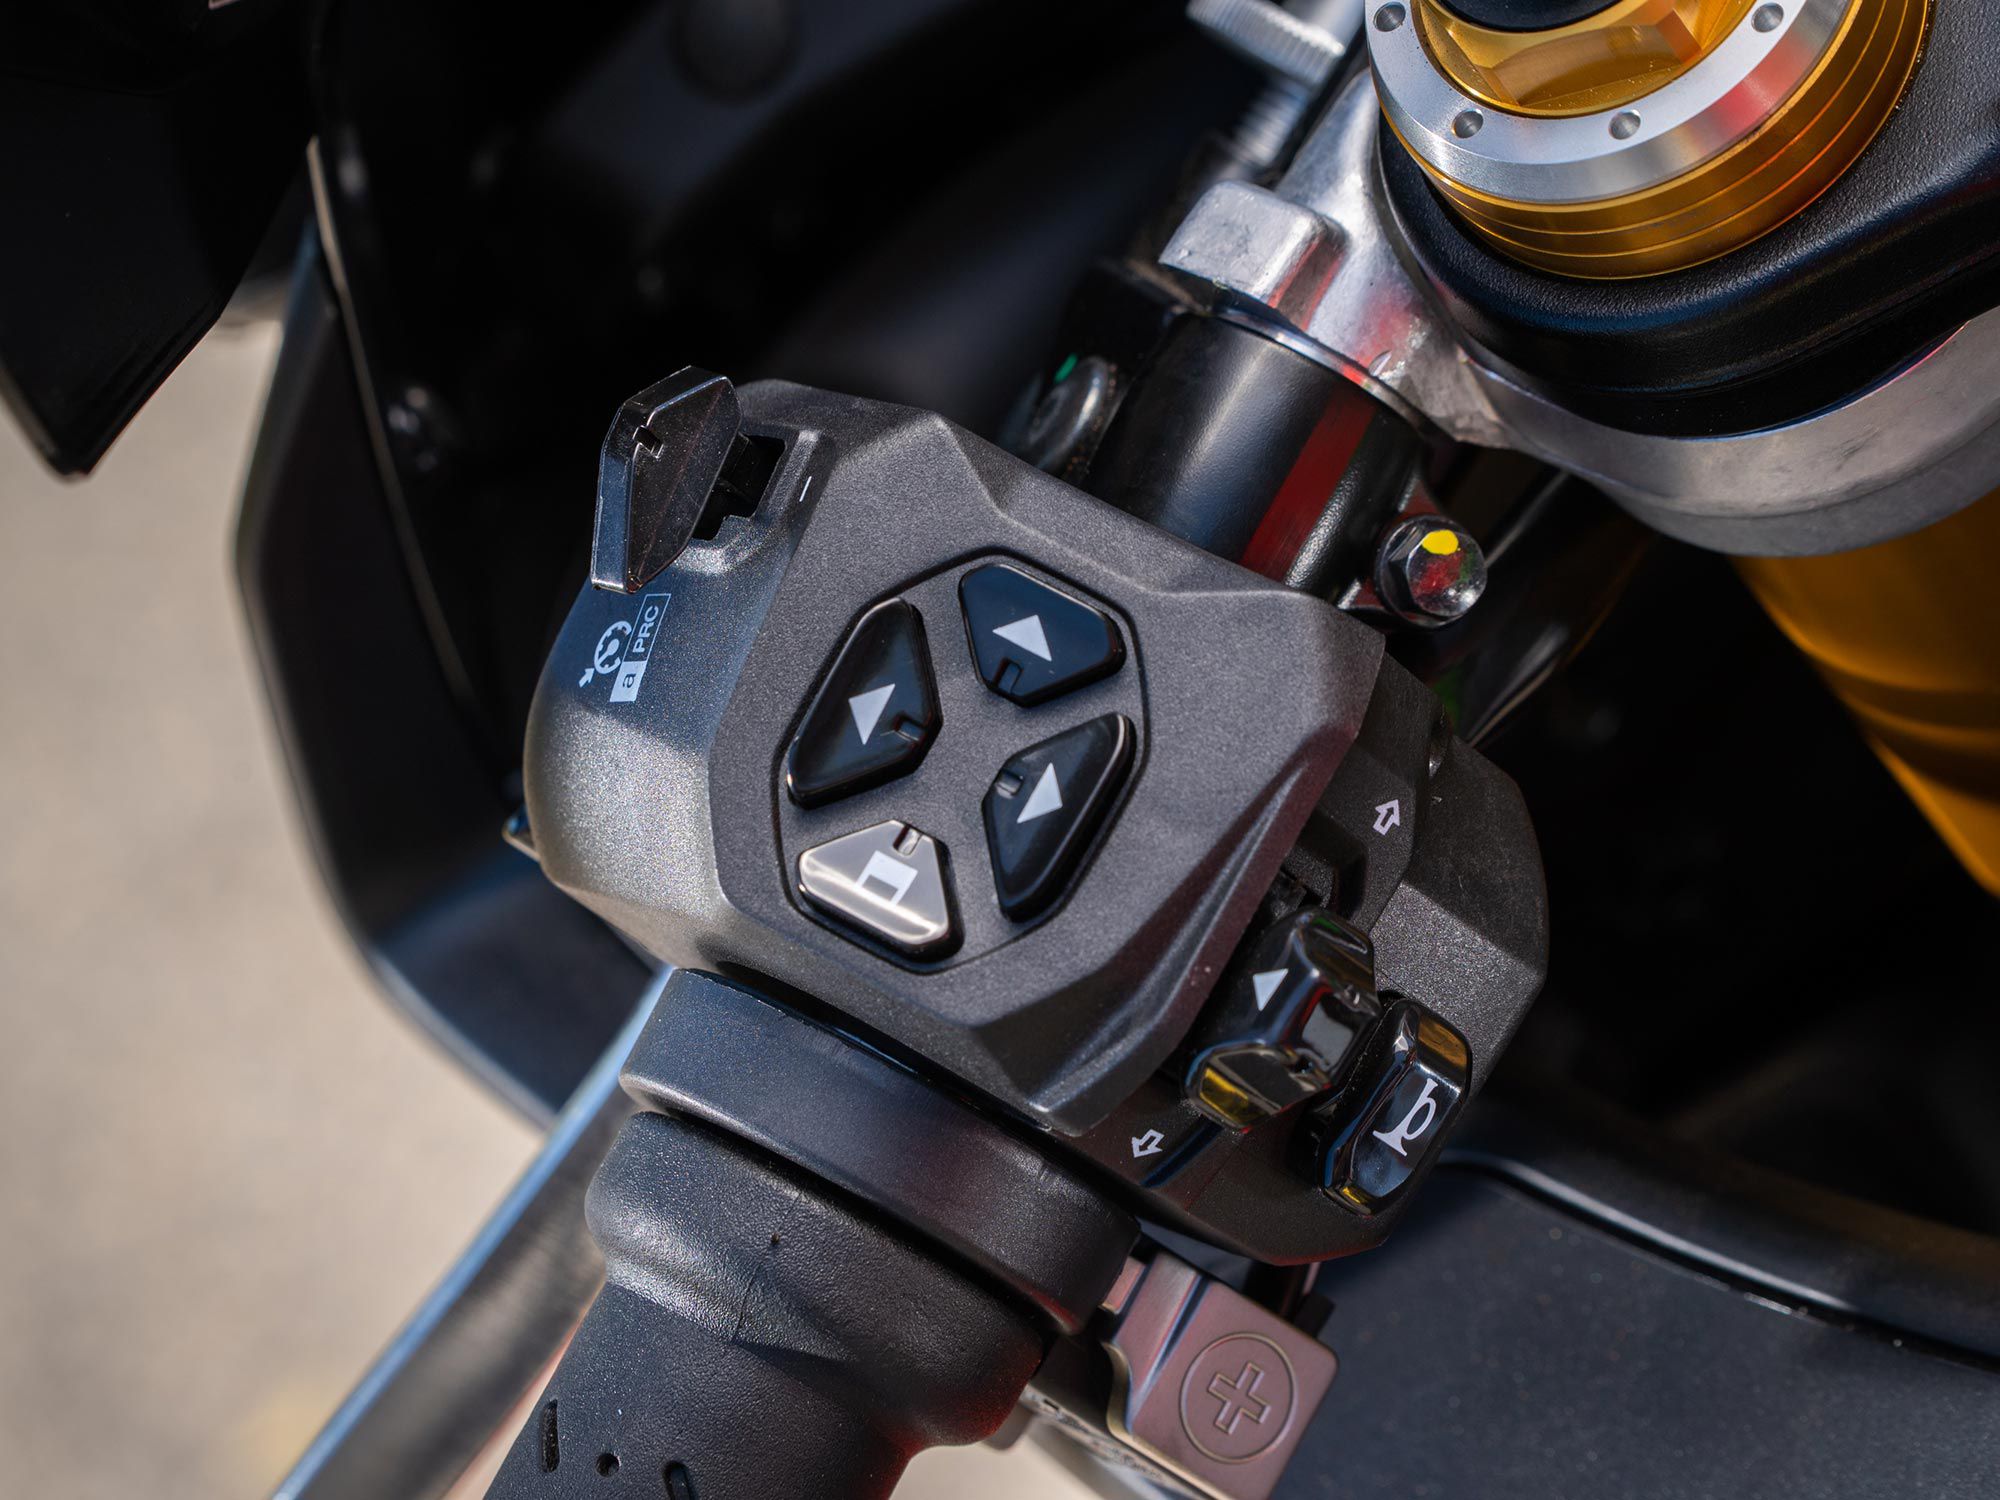 This joystick manipulates the RSV4’s instrument panel. It is easy to use and the switch gear offers pleasing tactile function with gloves.